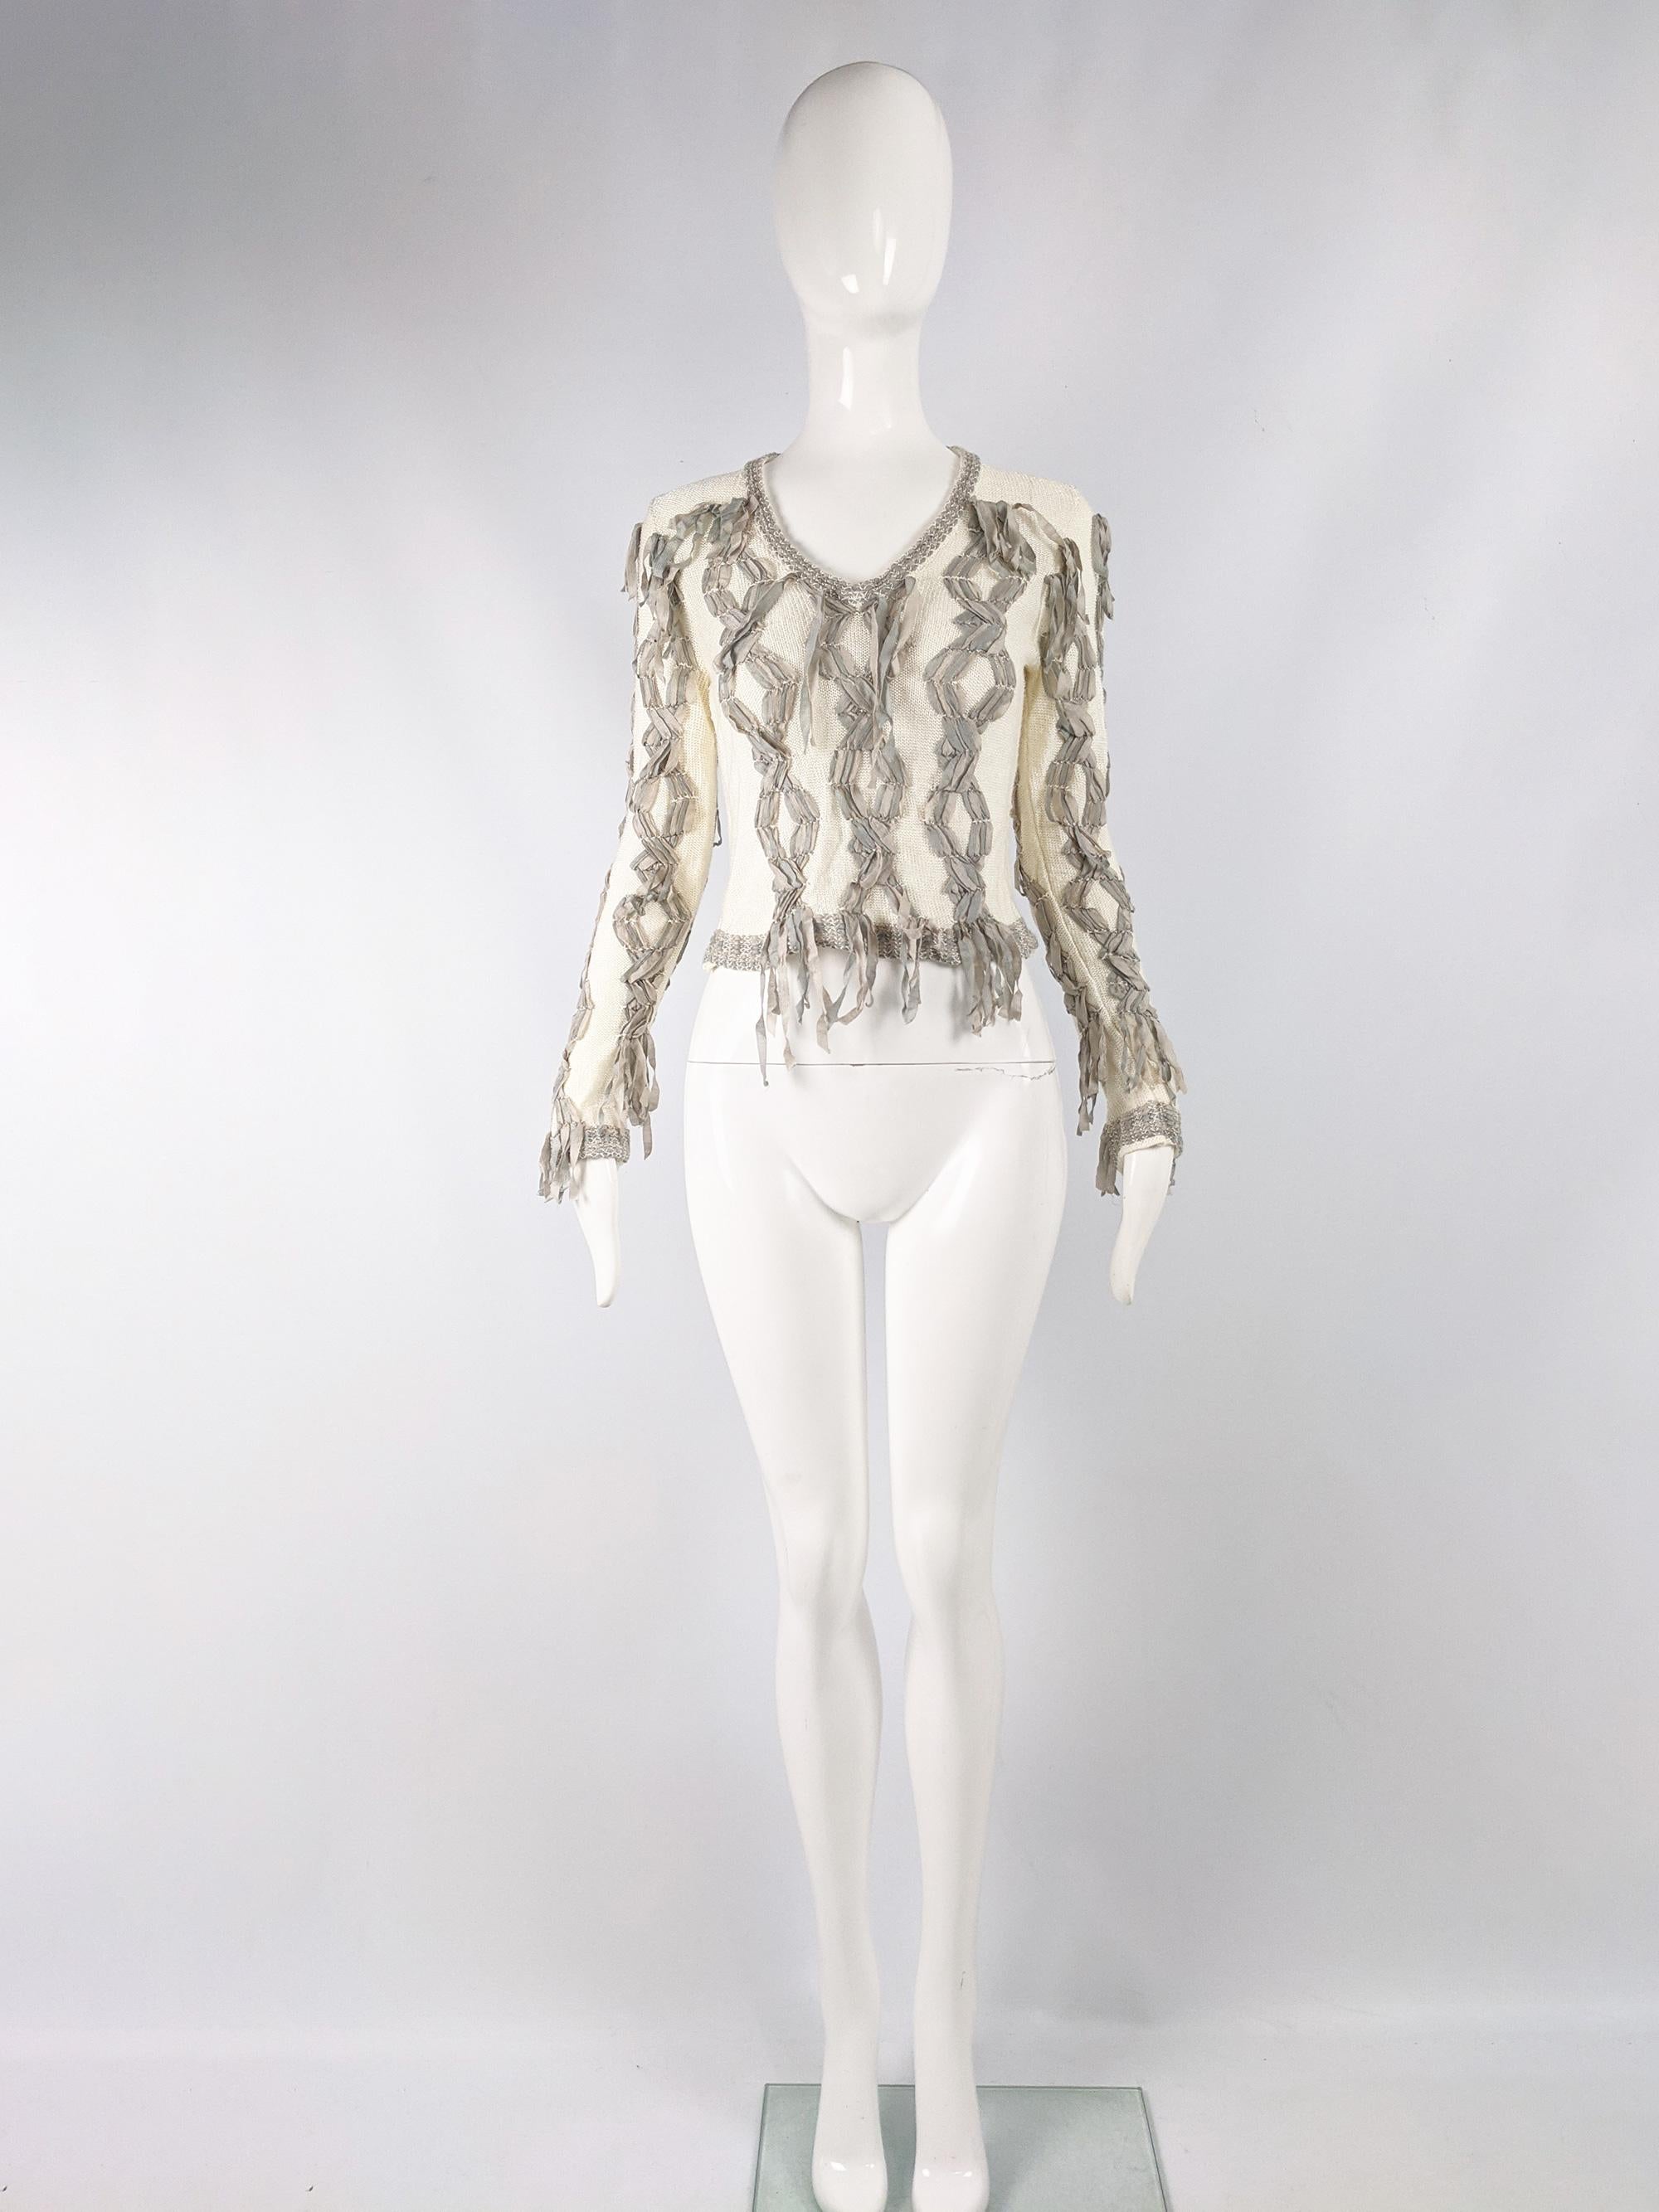 A beautiful womens Christian Dior Boutique sweater from the early 2000s, designed by John Galliano. In a cream knit fabric with beautiful, intricate ribbonwork. 

Size: Marked vintage F 40 but fits more like a modern UK 10/ US 6/ EU 38. Please check